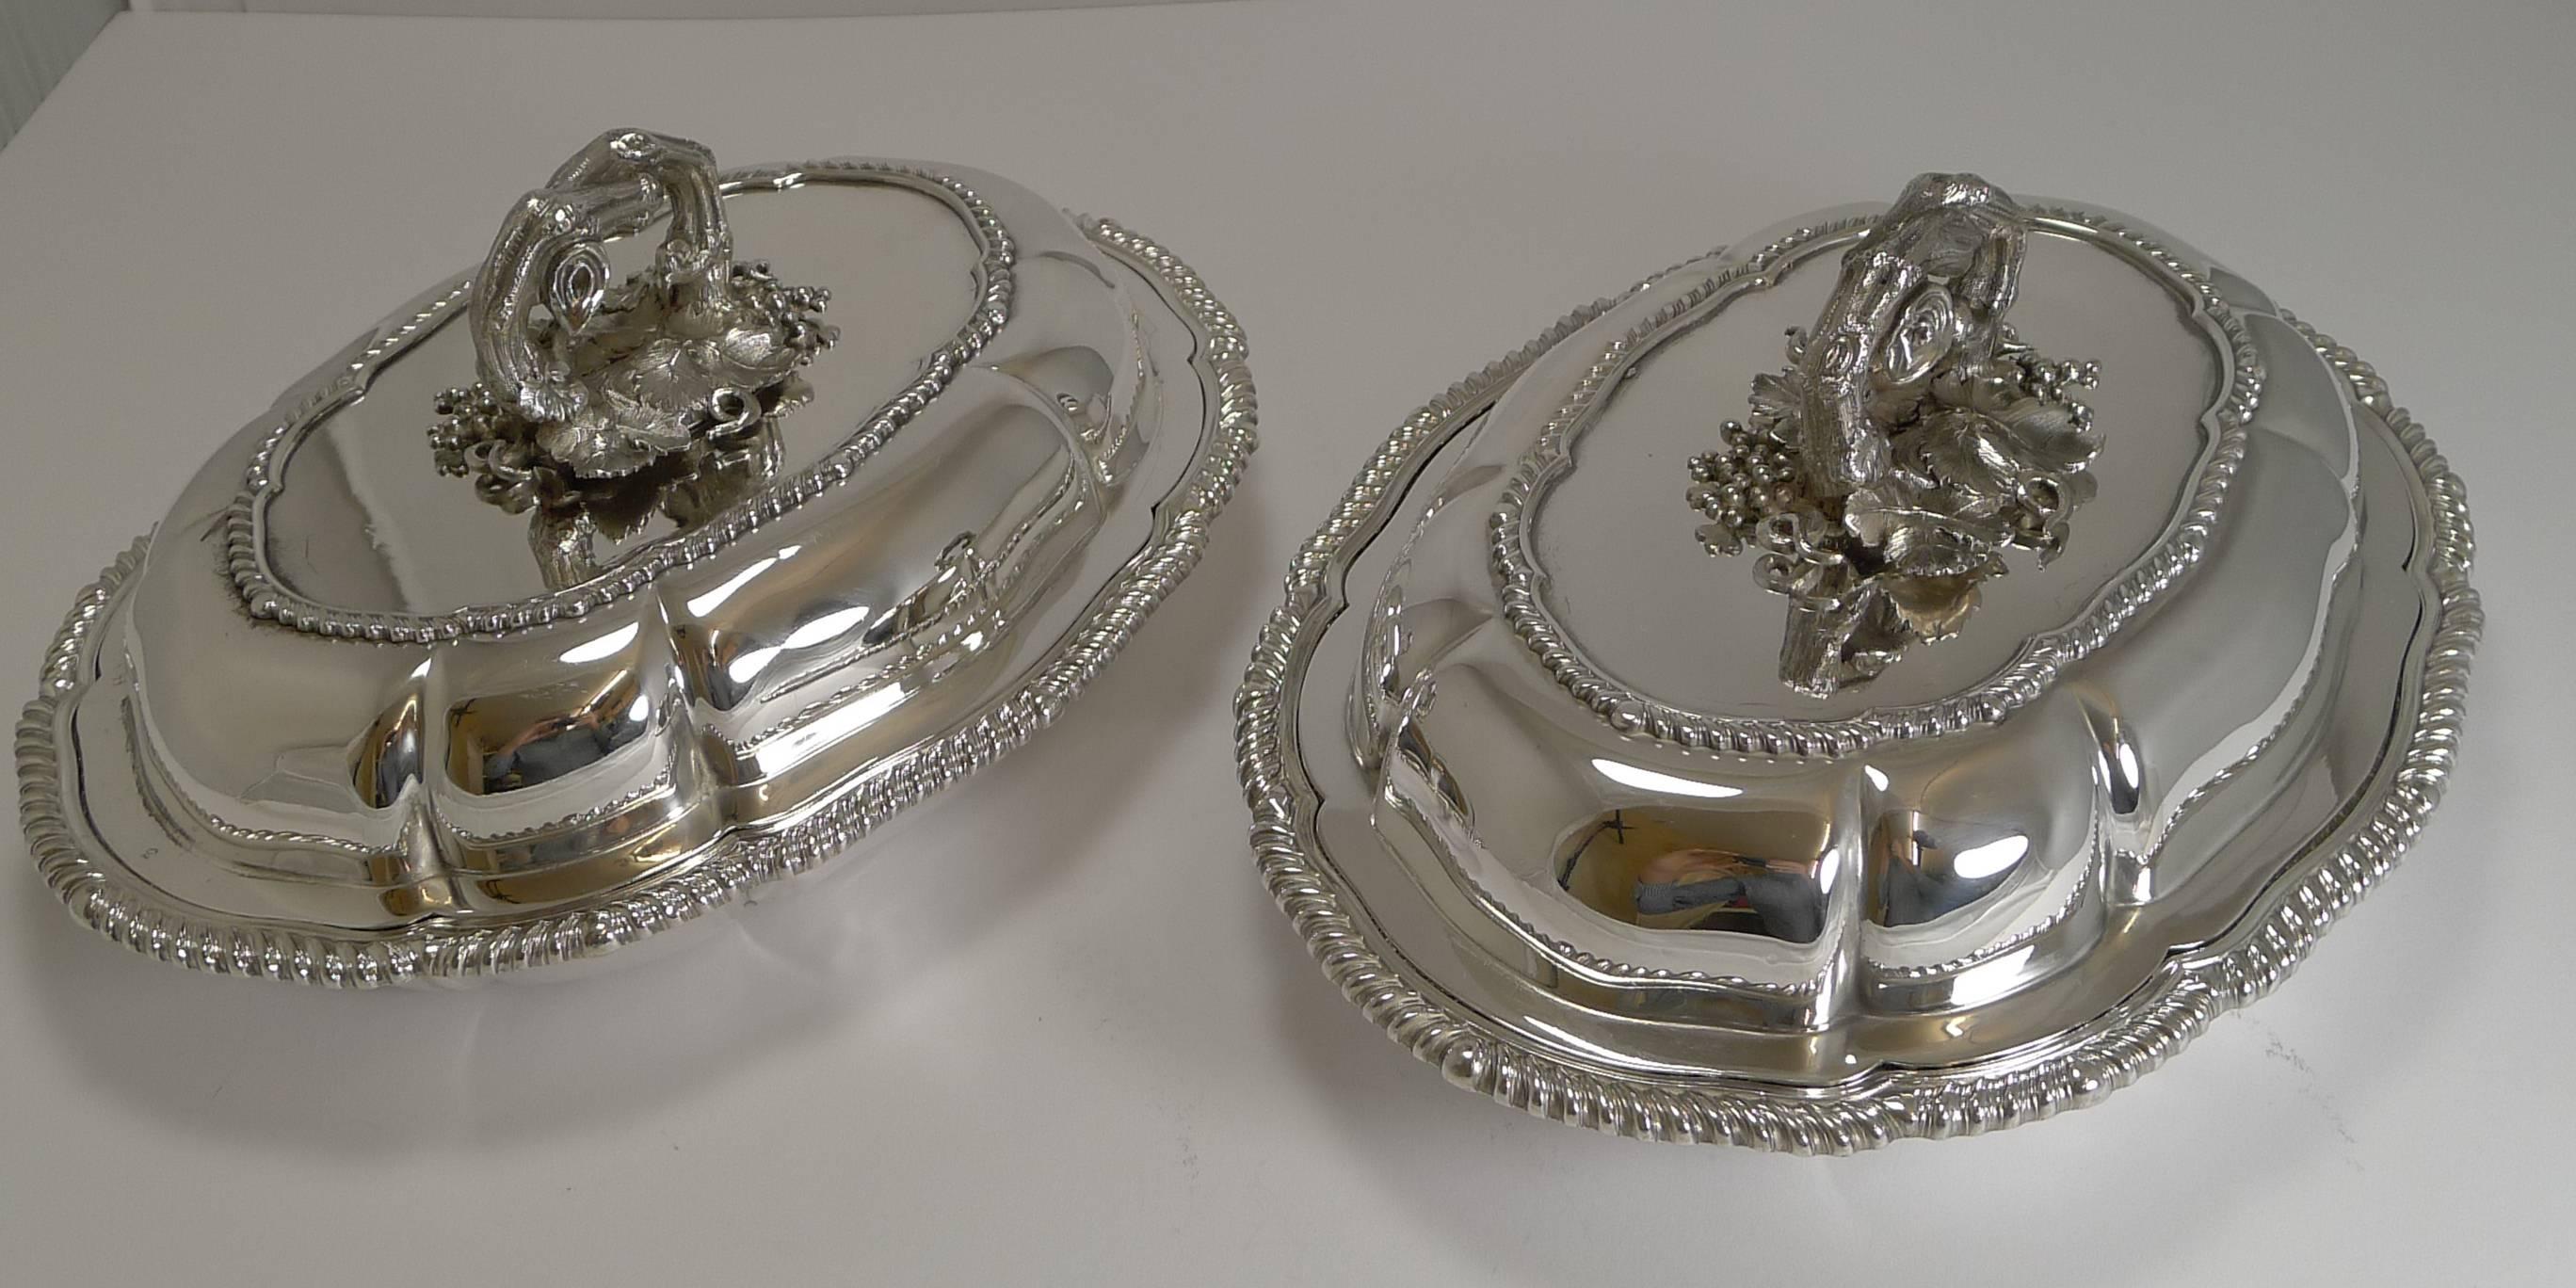 A fabulous pair of Victorian silver plated Entree dishes with an elegant shape and crowned exquisite naturalistic handles.

Made by the most important manufacturers of English silver plate, Elkington and Company. Being Elkington, it allows us to